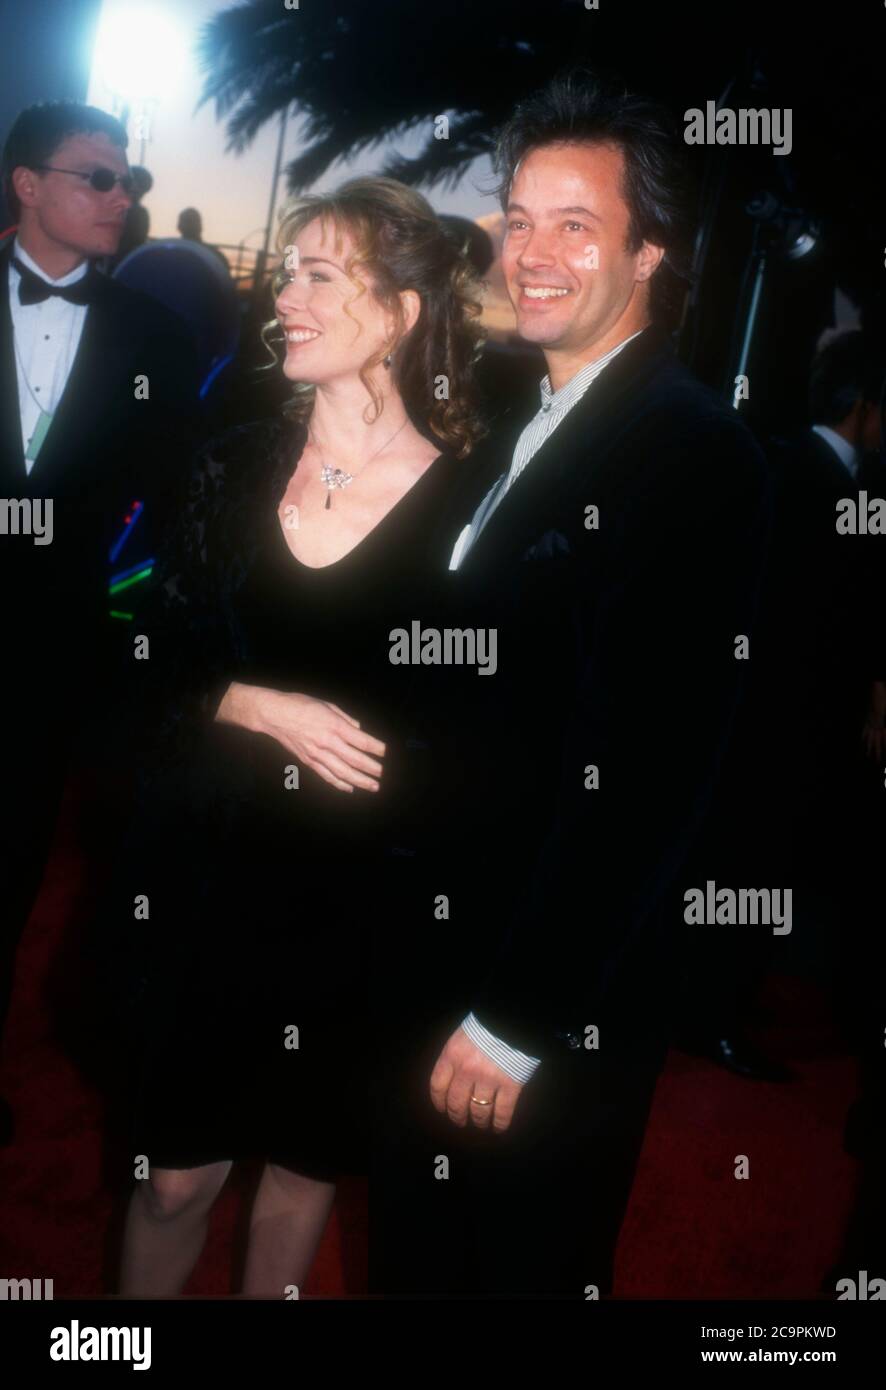 Santa Monica, California, USA 24th February 1996 Actress Roxanne Hart and actor Philip Casnoff attend the Second Annual Screen Actors Guild Awards on February 24, 1996 at Santa Monica Civic Auditorium in Santa Monica, California, USA. Photo by Barry King/Alamy Stock Photo Stock Photo